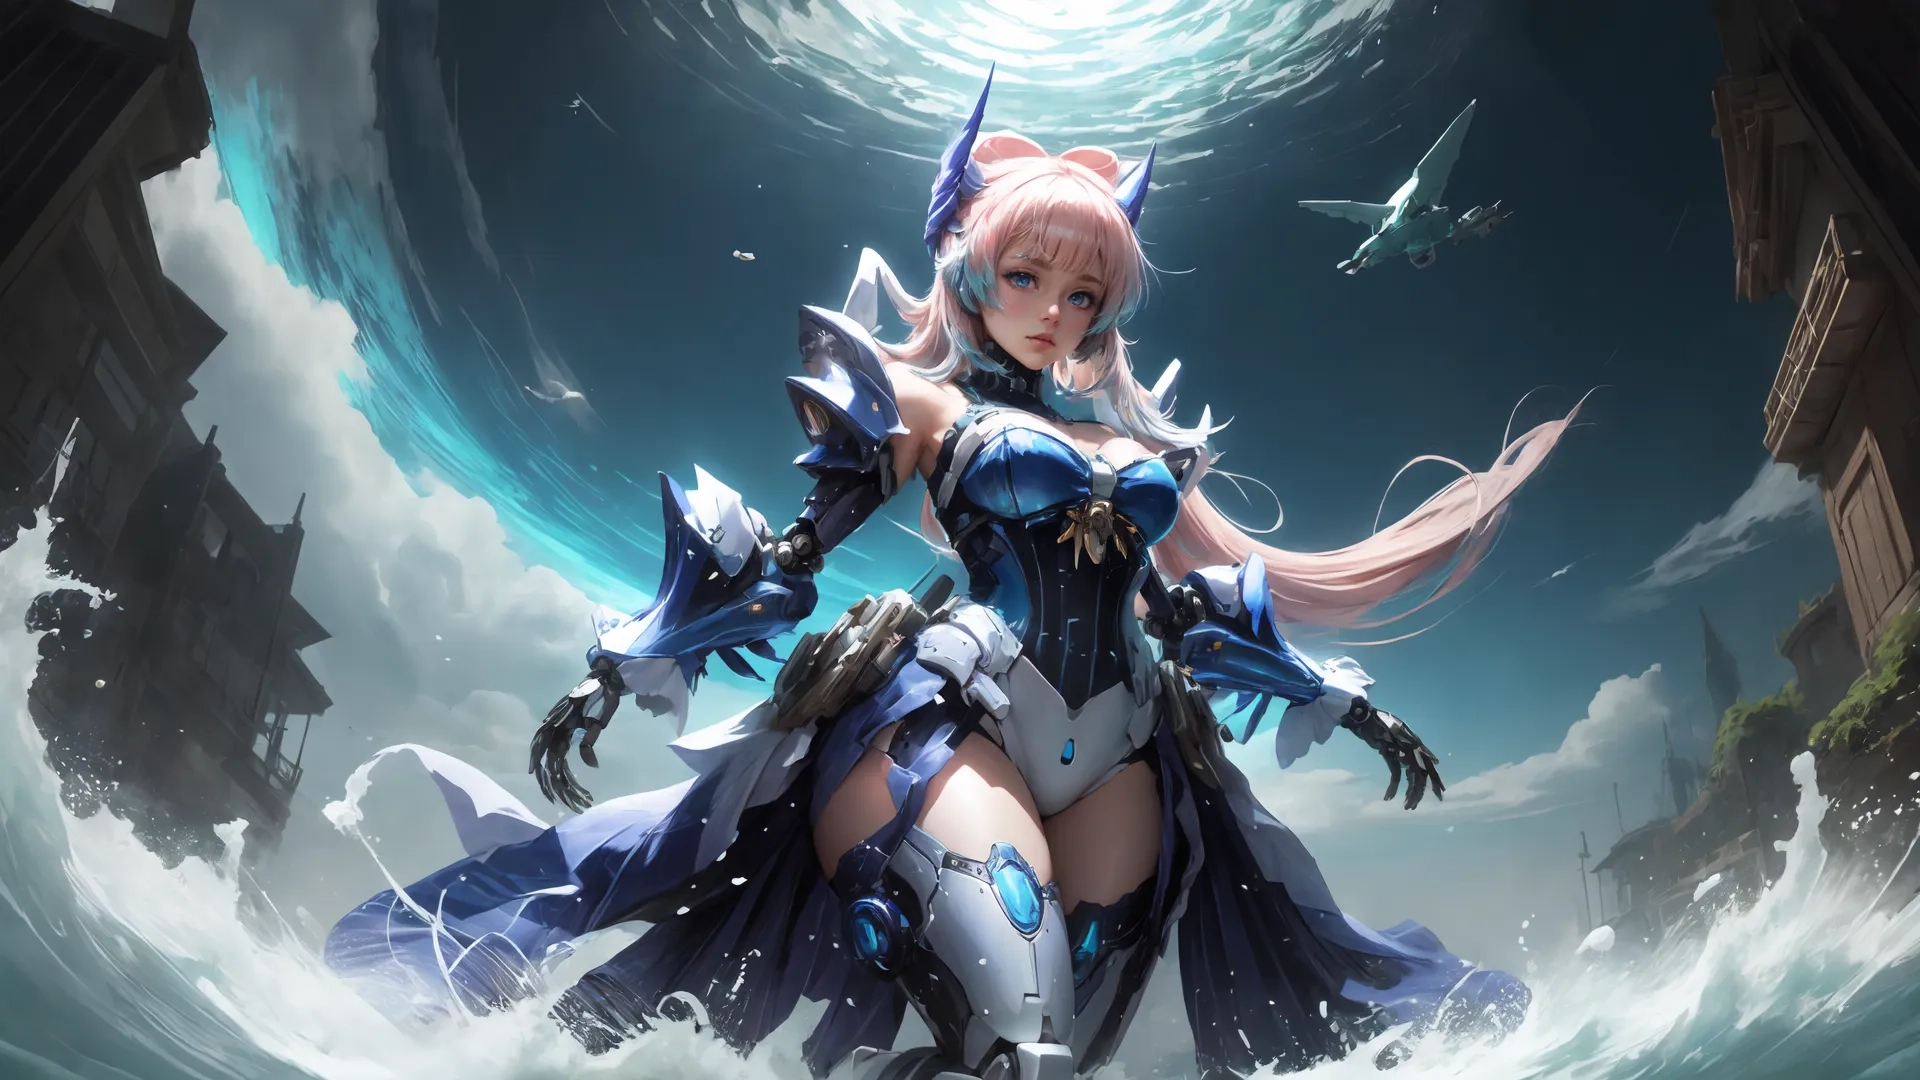 the art work is a fantasy girl in the sea with an ice crystalsite cape and a fish headdress that includes a large cat and a large tail
